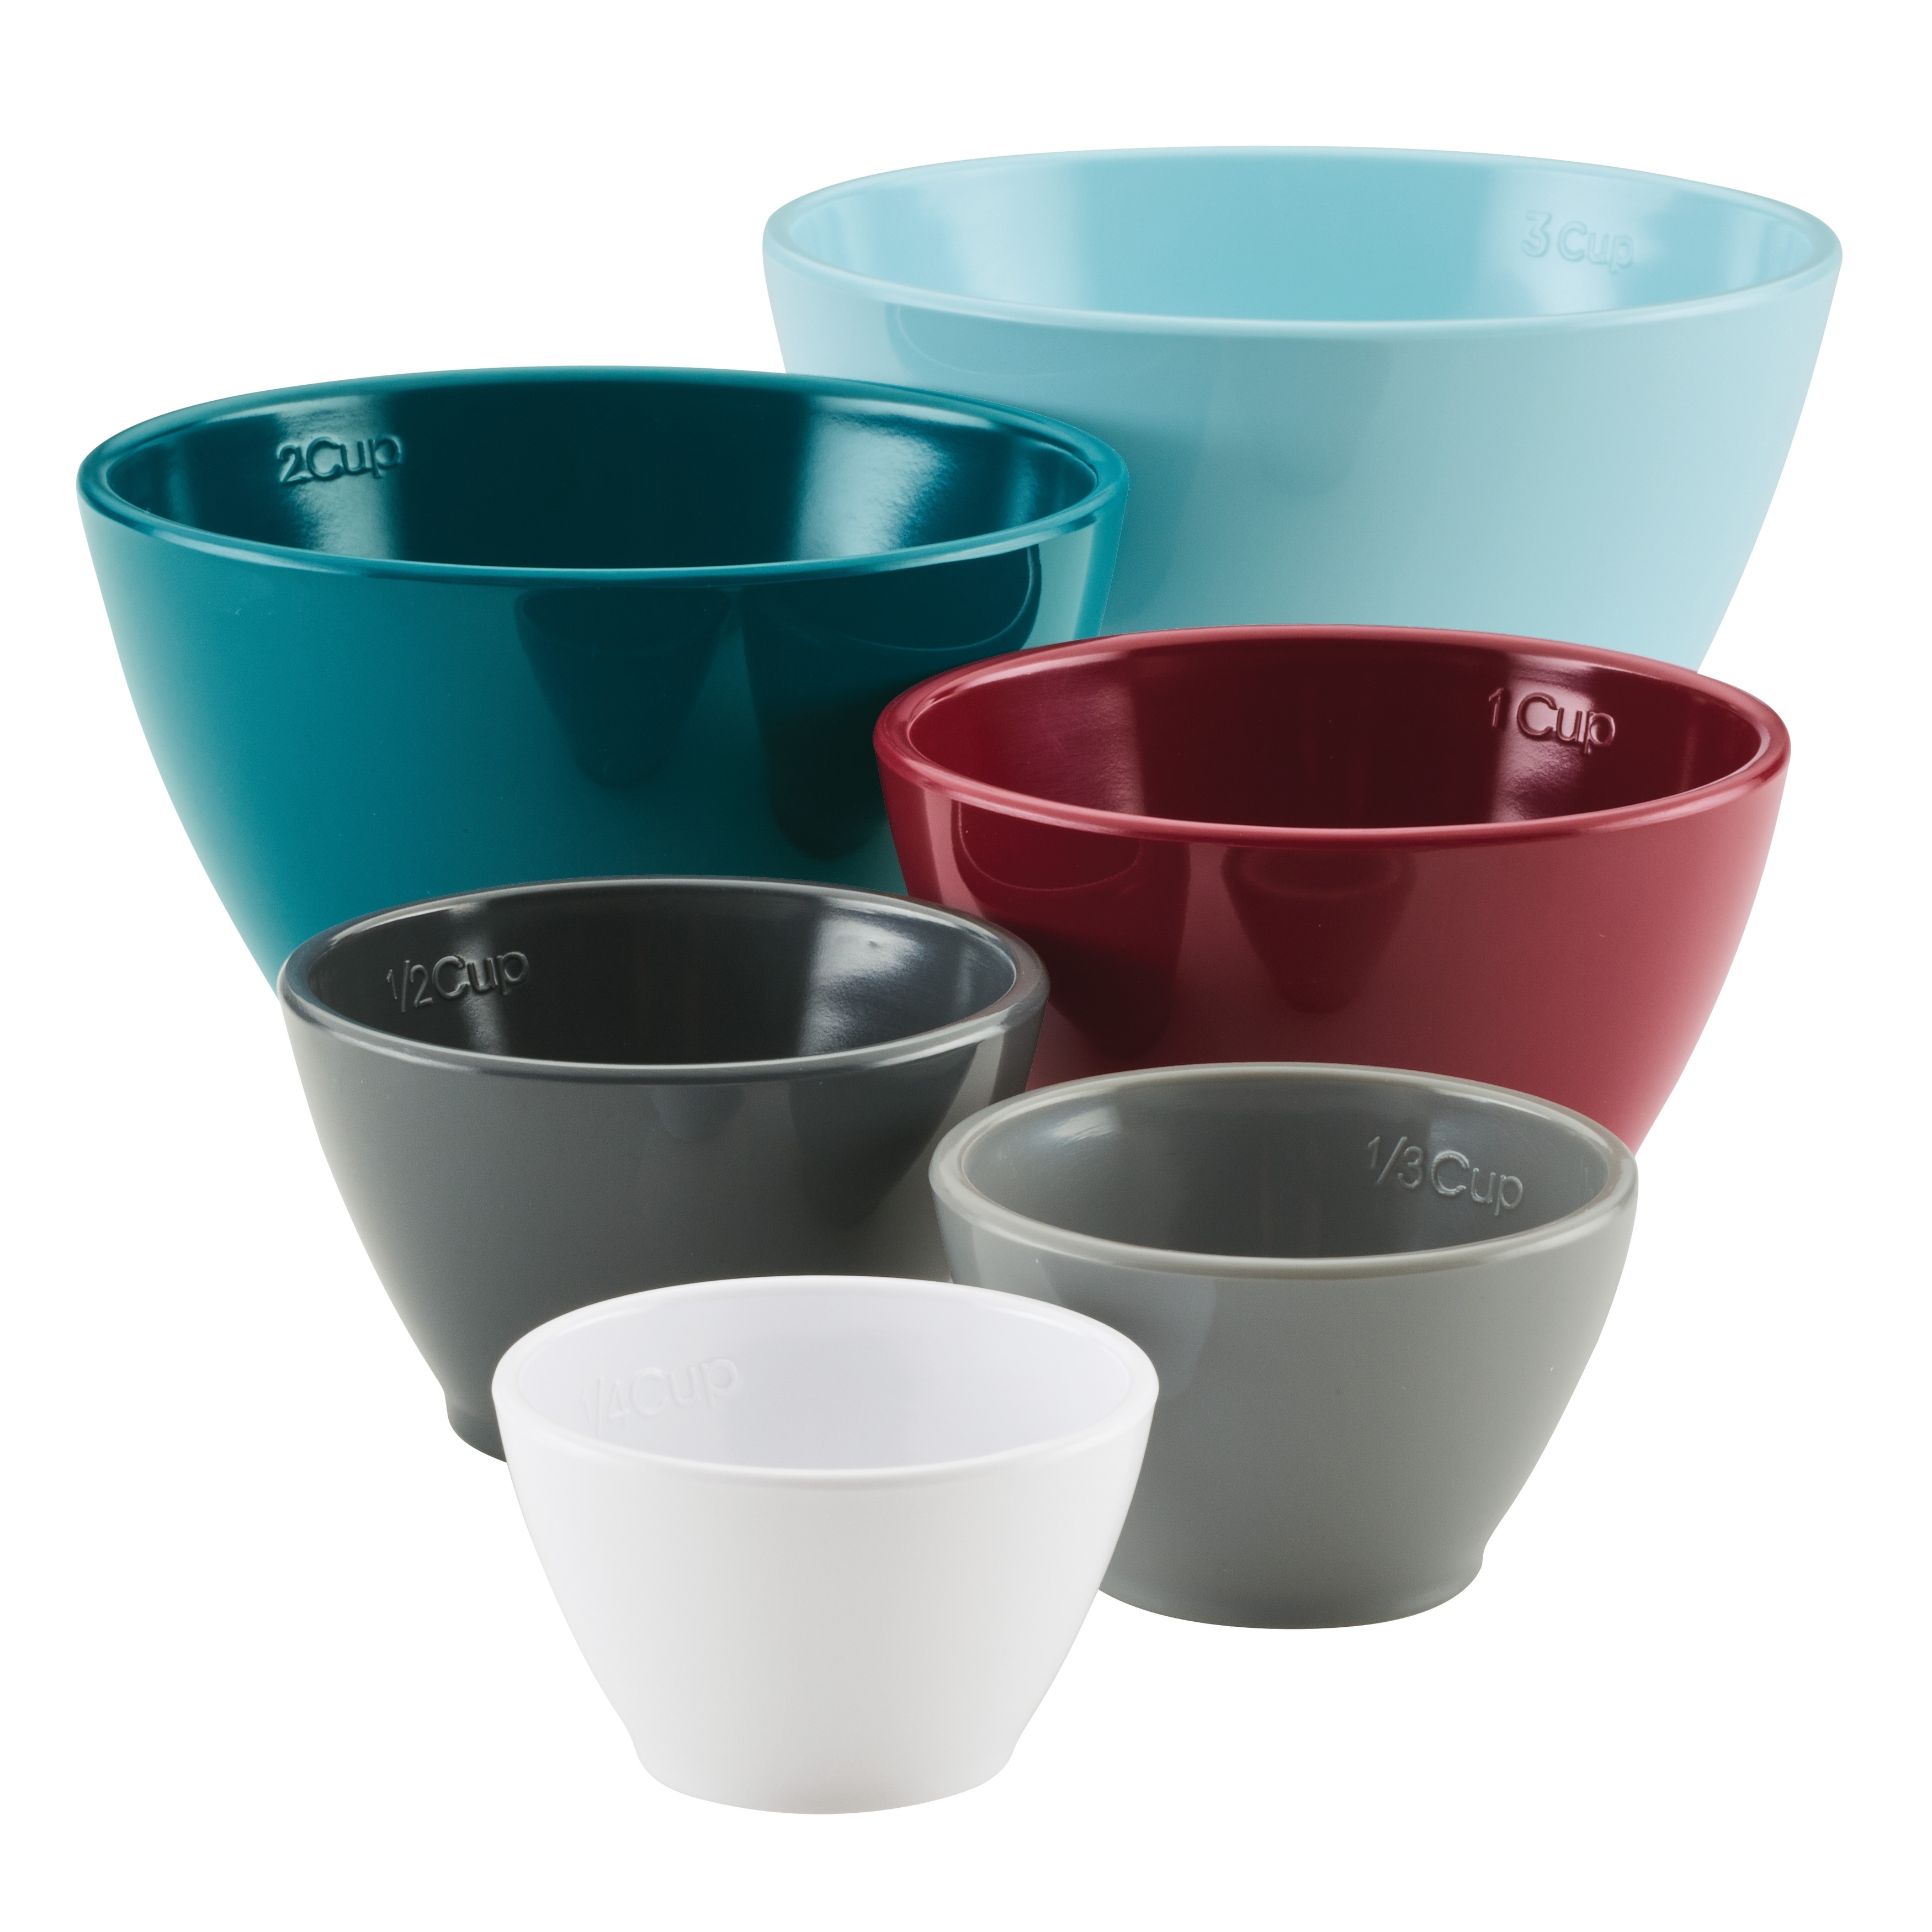 https://ak1.ostkcdn.com/images/products/is/images/direct/74b82306b0a6bb460a78bd5b137461440b0f25d8/Rachael-Ray-Create-Delicious-Melamine-Nesting-Measuring-Cups%2C-6-Piece%2C-Assorted-Colors.jpg